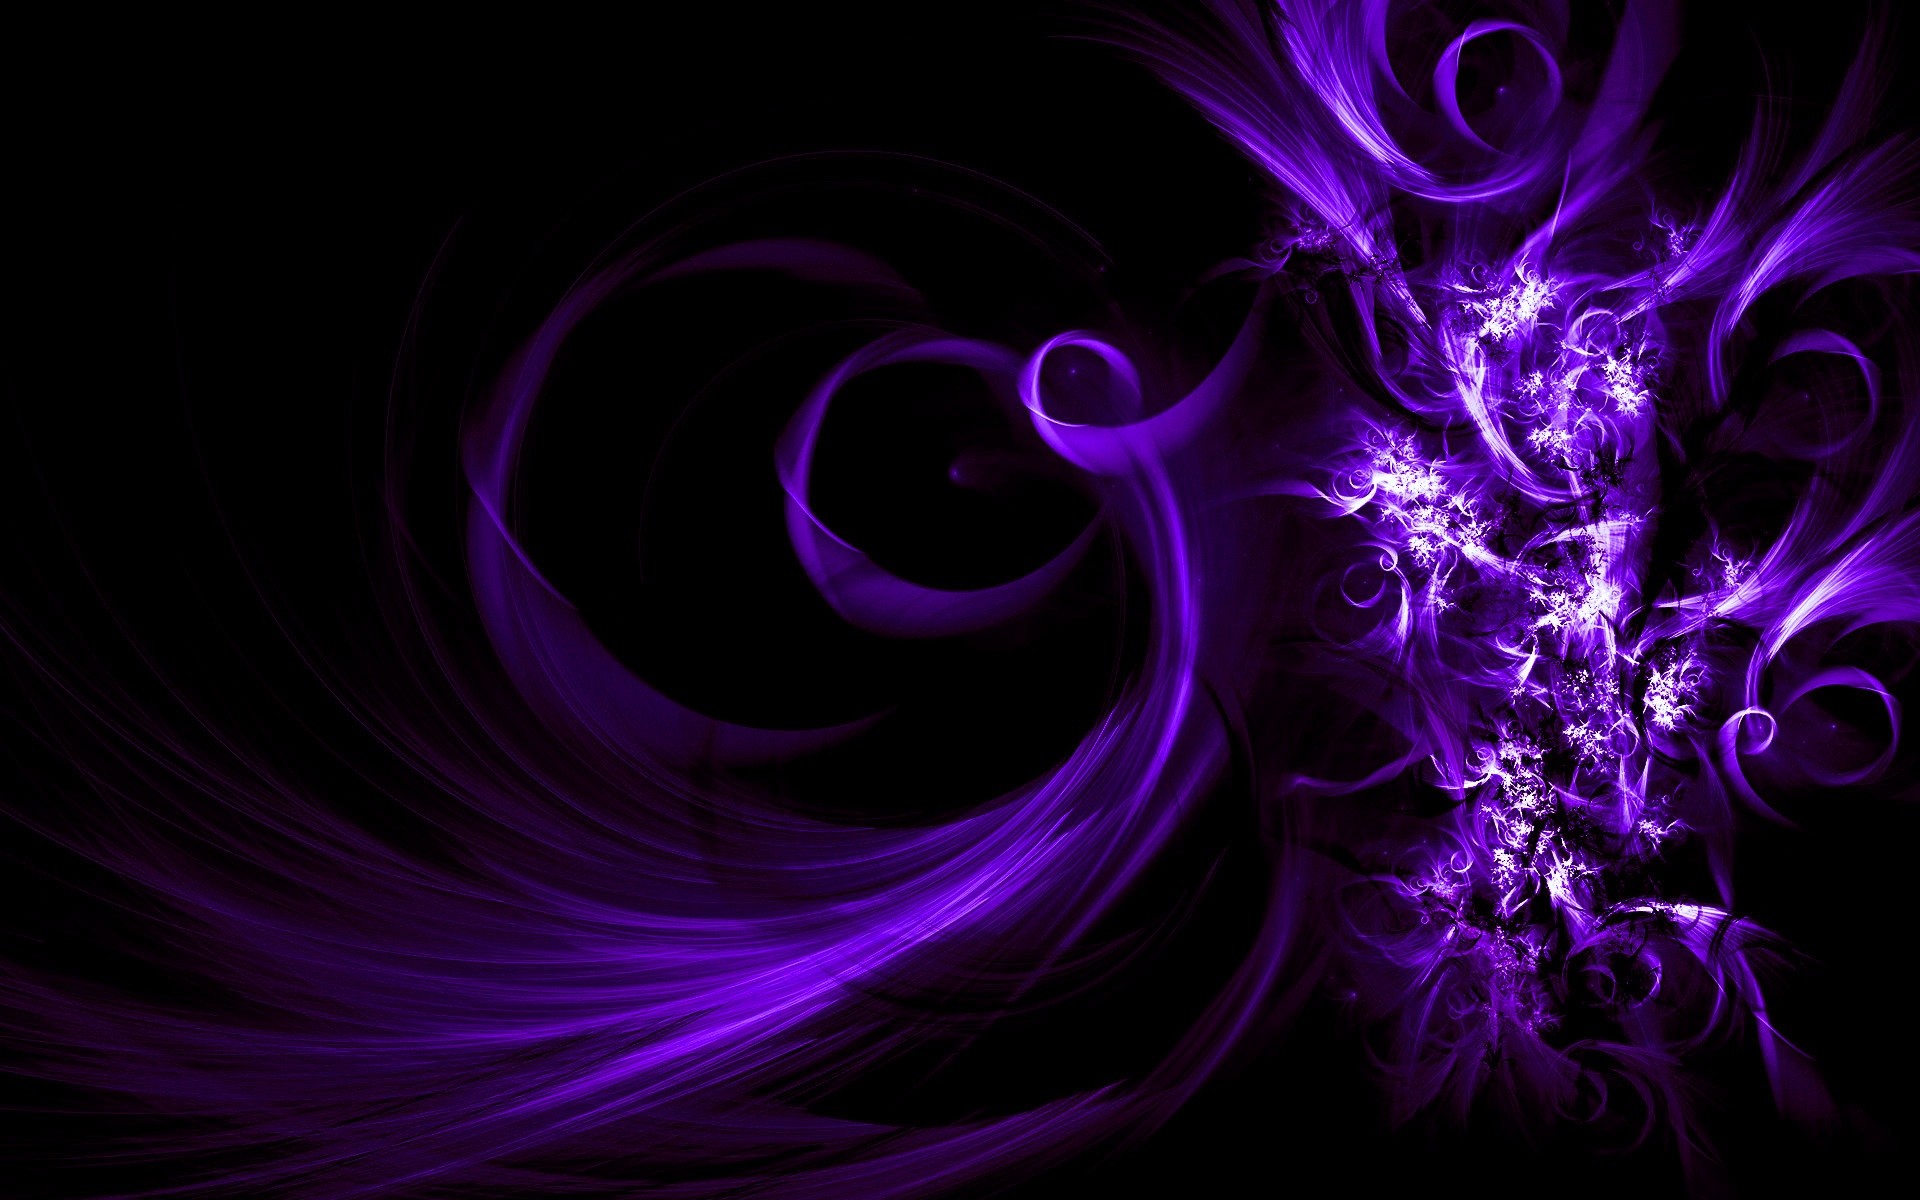 1920x1200 Black And Purple Abstract Cool Backgrounds Hd Wallpaper Site